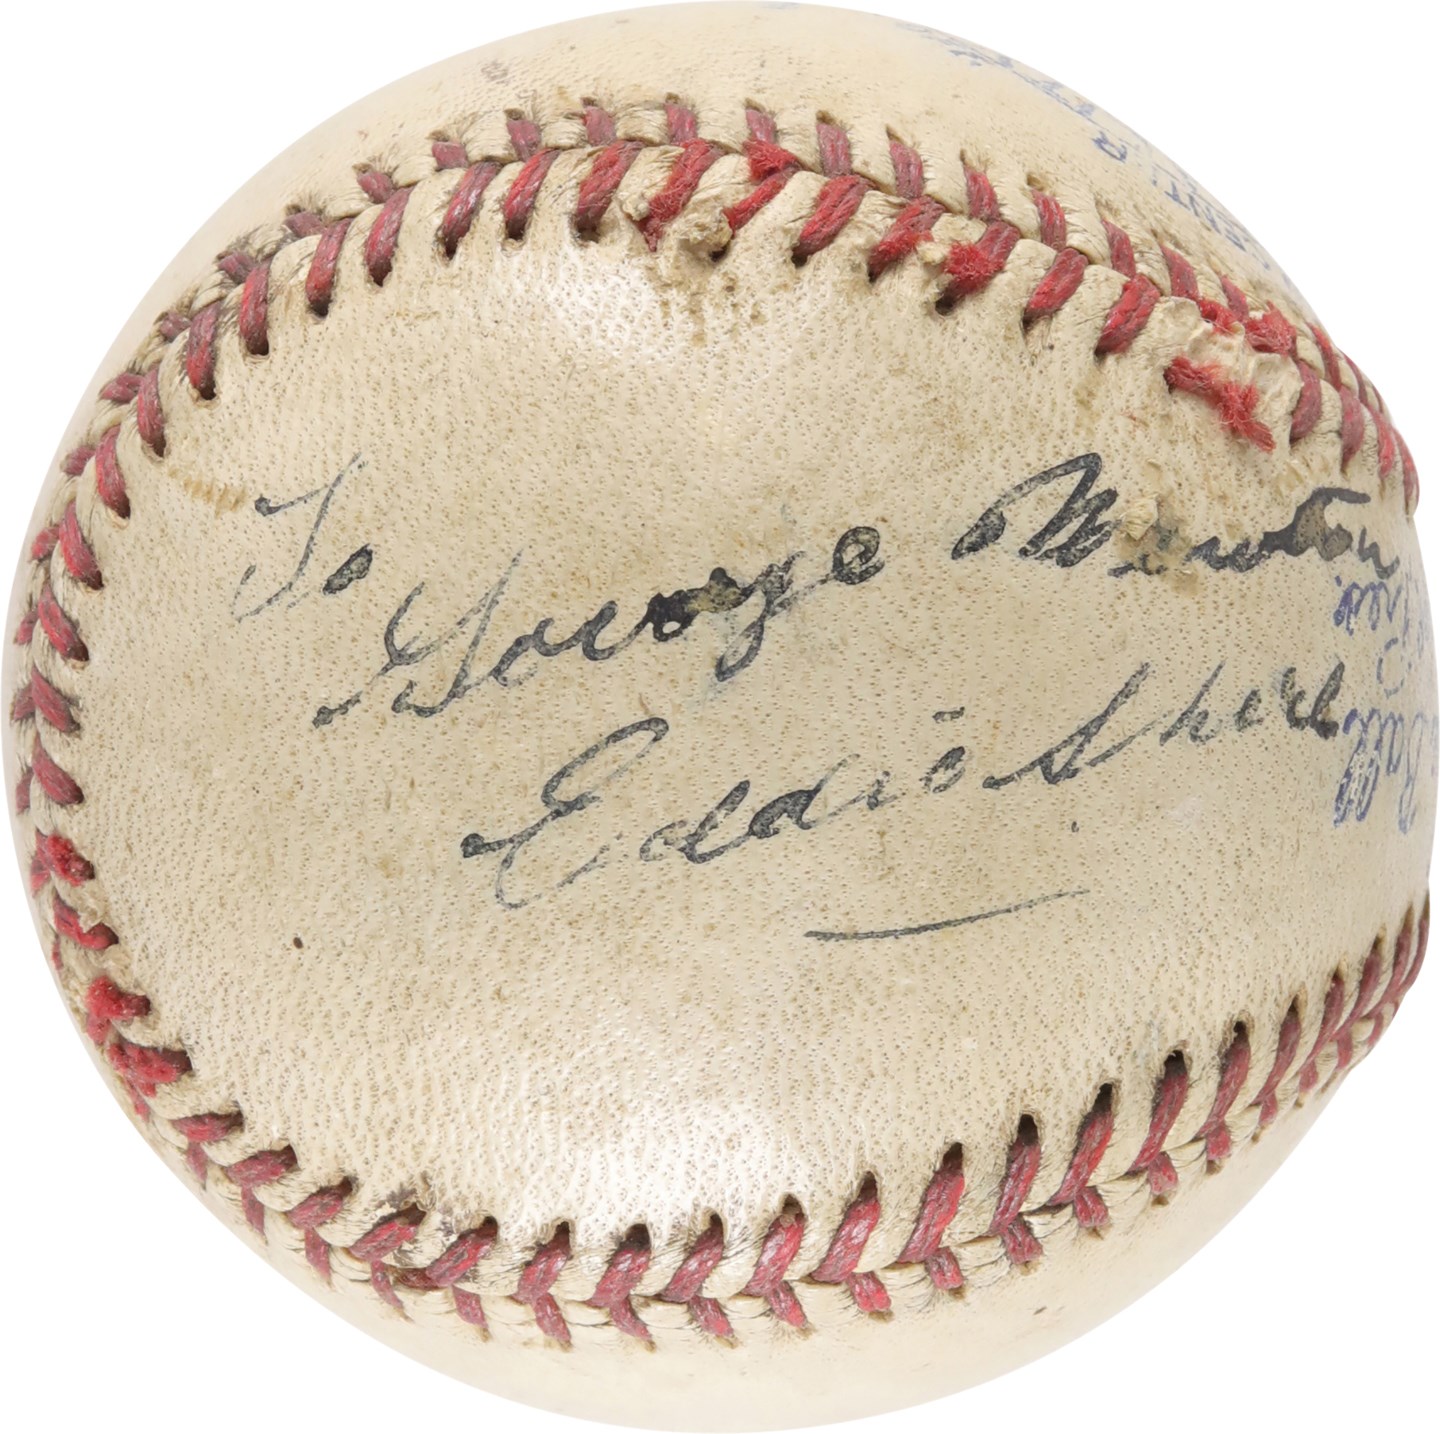 - 1930s Eddie Shore Single-Signed Baseball - Only Known Example (PSA)